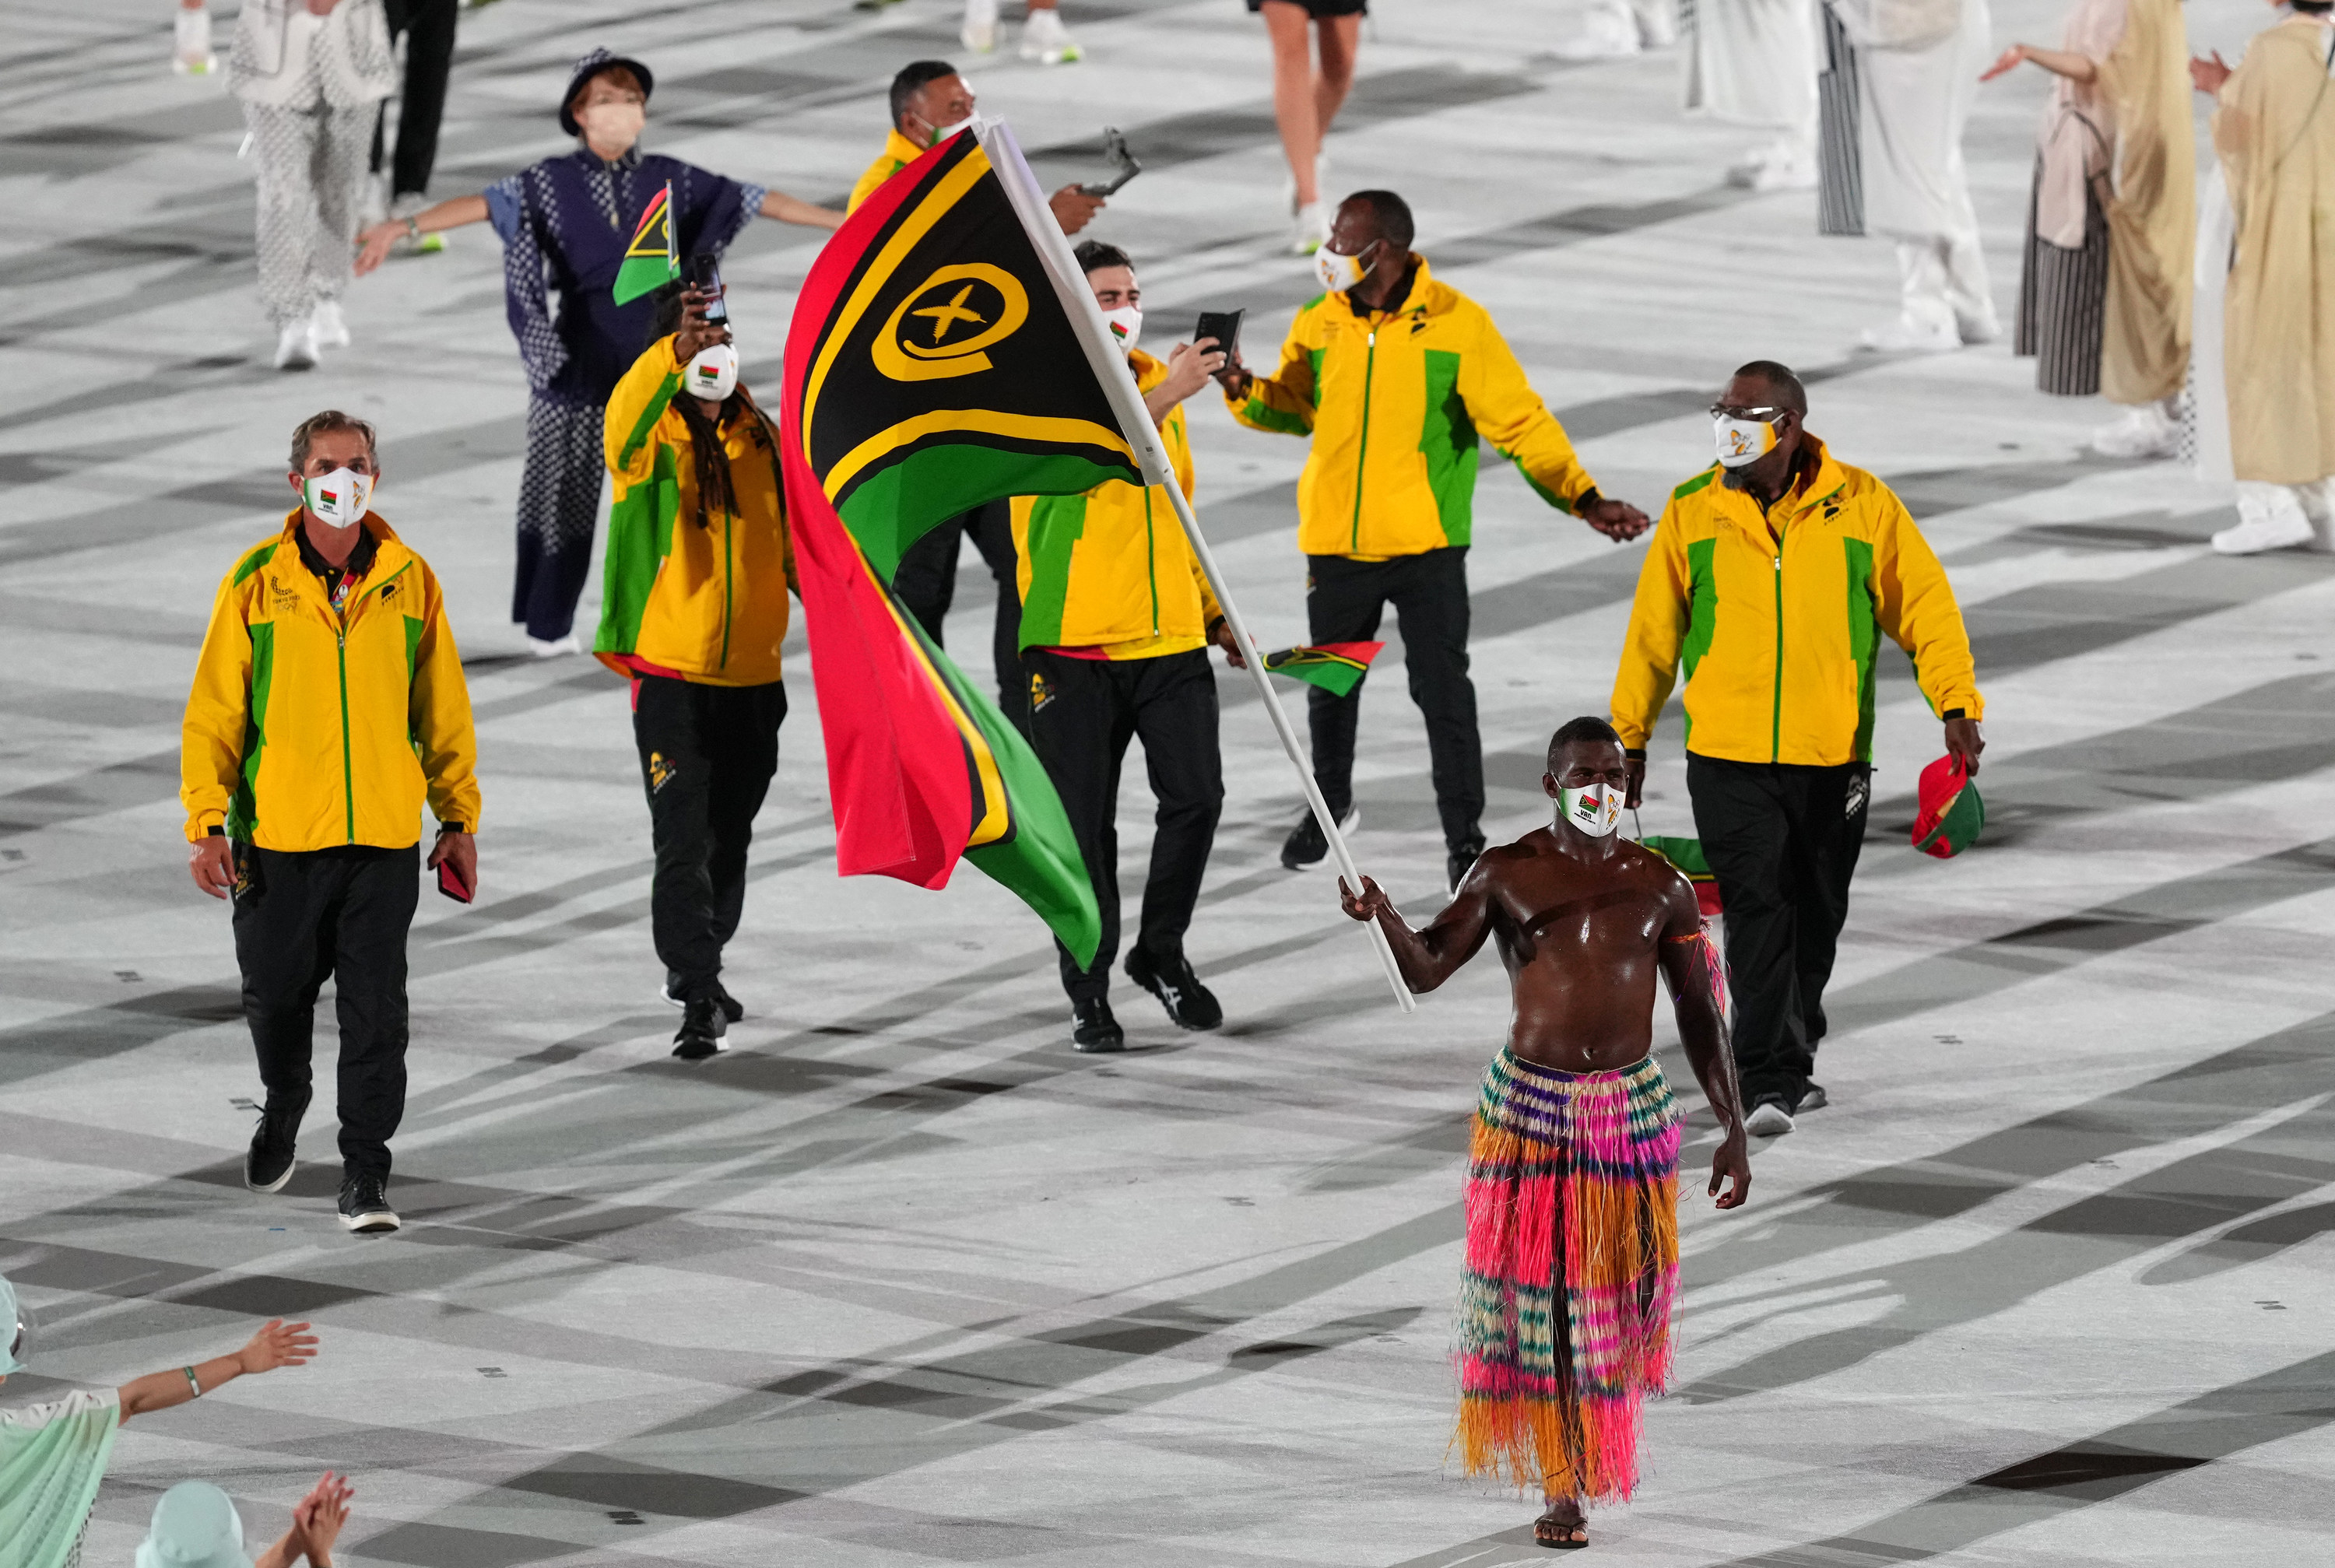 The athletes wore multi-colored tracksuits with the flag bearer wearing a traditional woven skirt